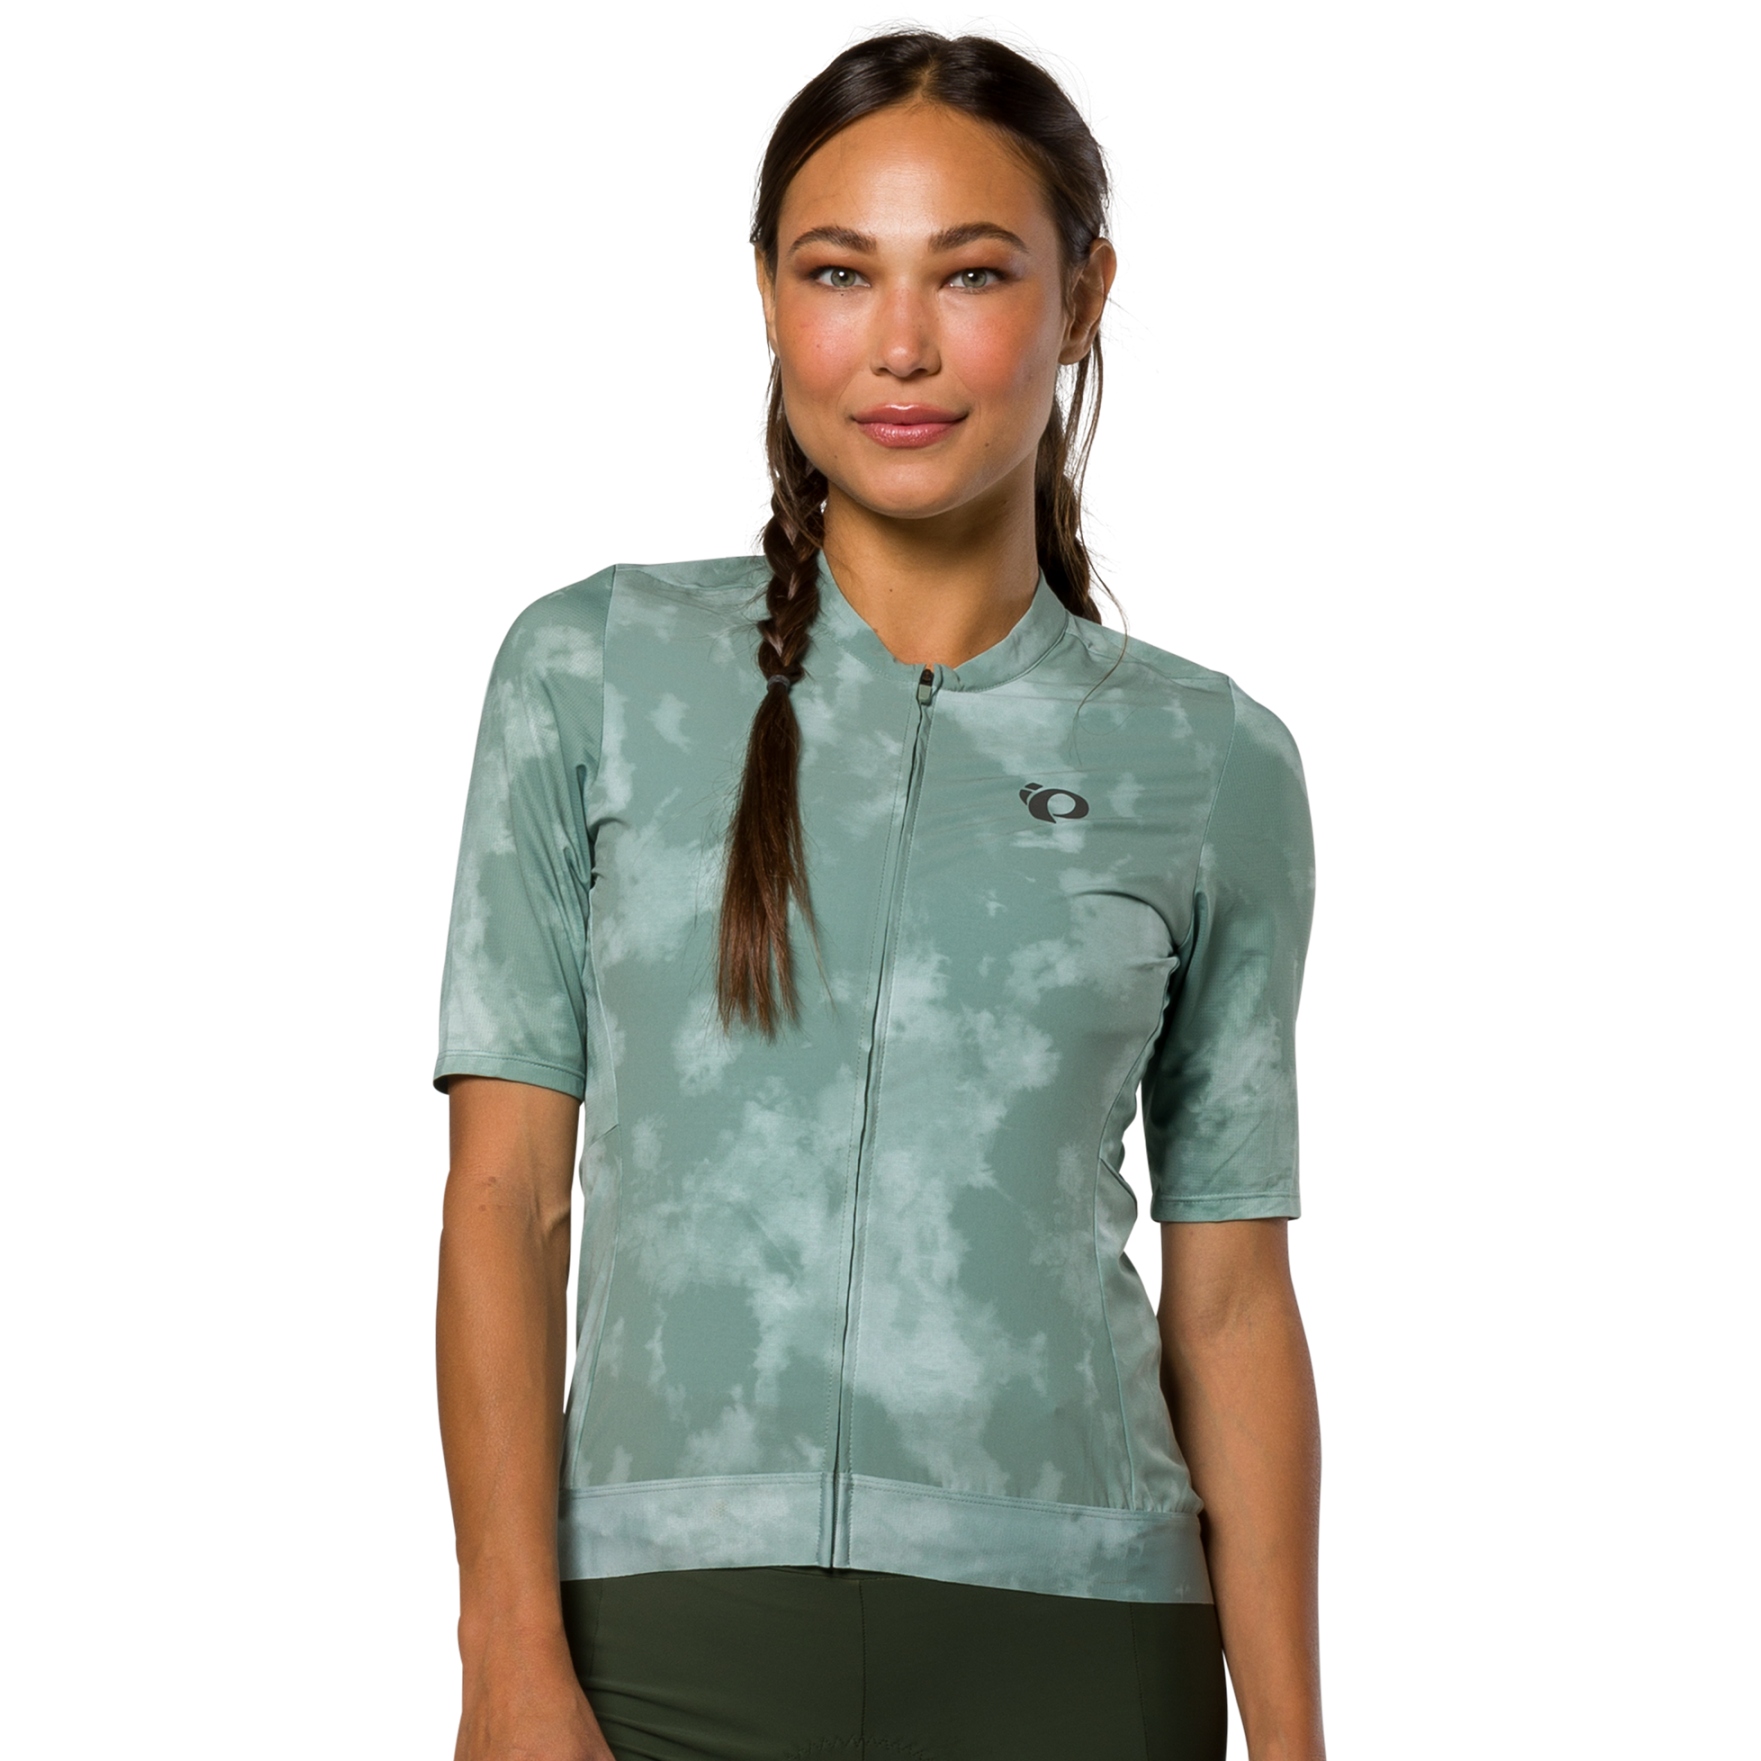 Picture of PEARL iZUMi Expedition Gravel Shortsleeve Jersey Women 11222415 - green bay spectral - AAM